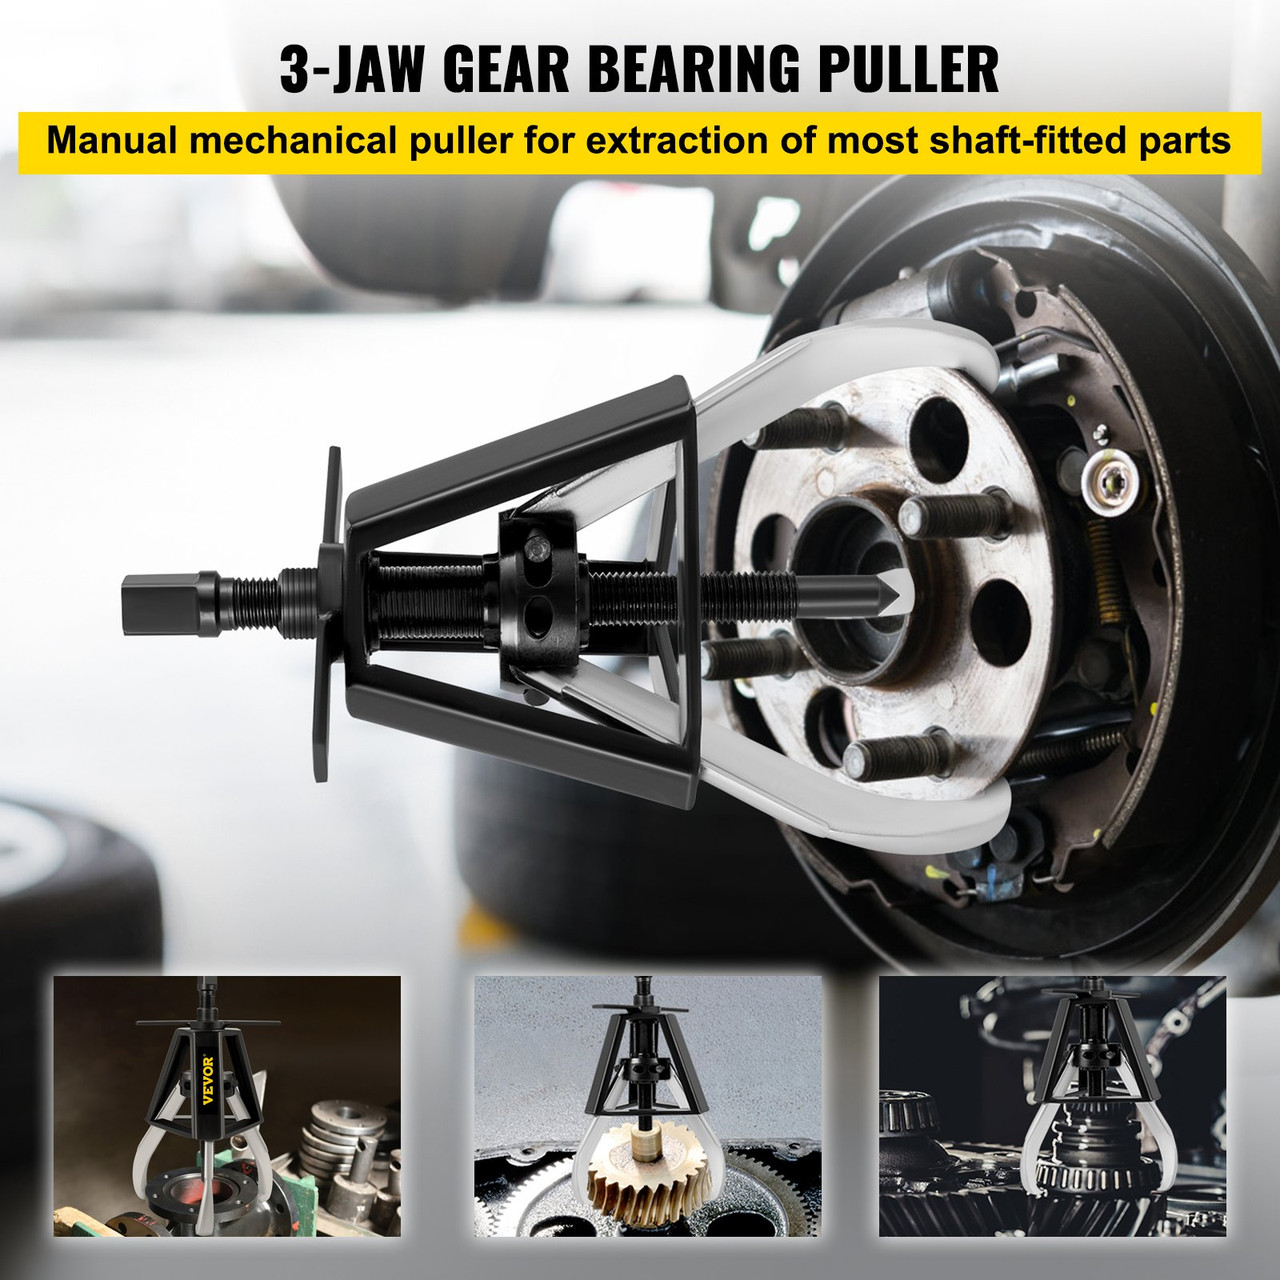 3 Gear Jaw Puller, 17 Ton/37468 LBS Capacity Manual Puller,19" - 24.5" Spread Reach and 4.9" - 12" Spread Range, 20" Lead Screw Length Gear Removal Tools for Slide Gears, Pulleys, and Flywheels